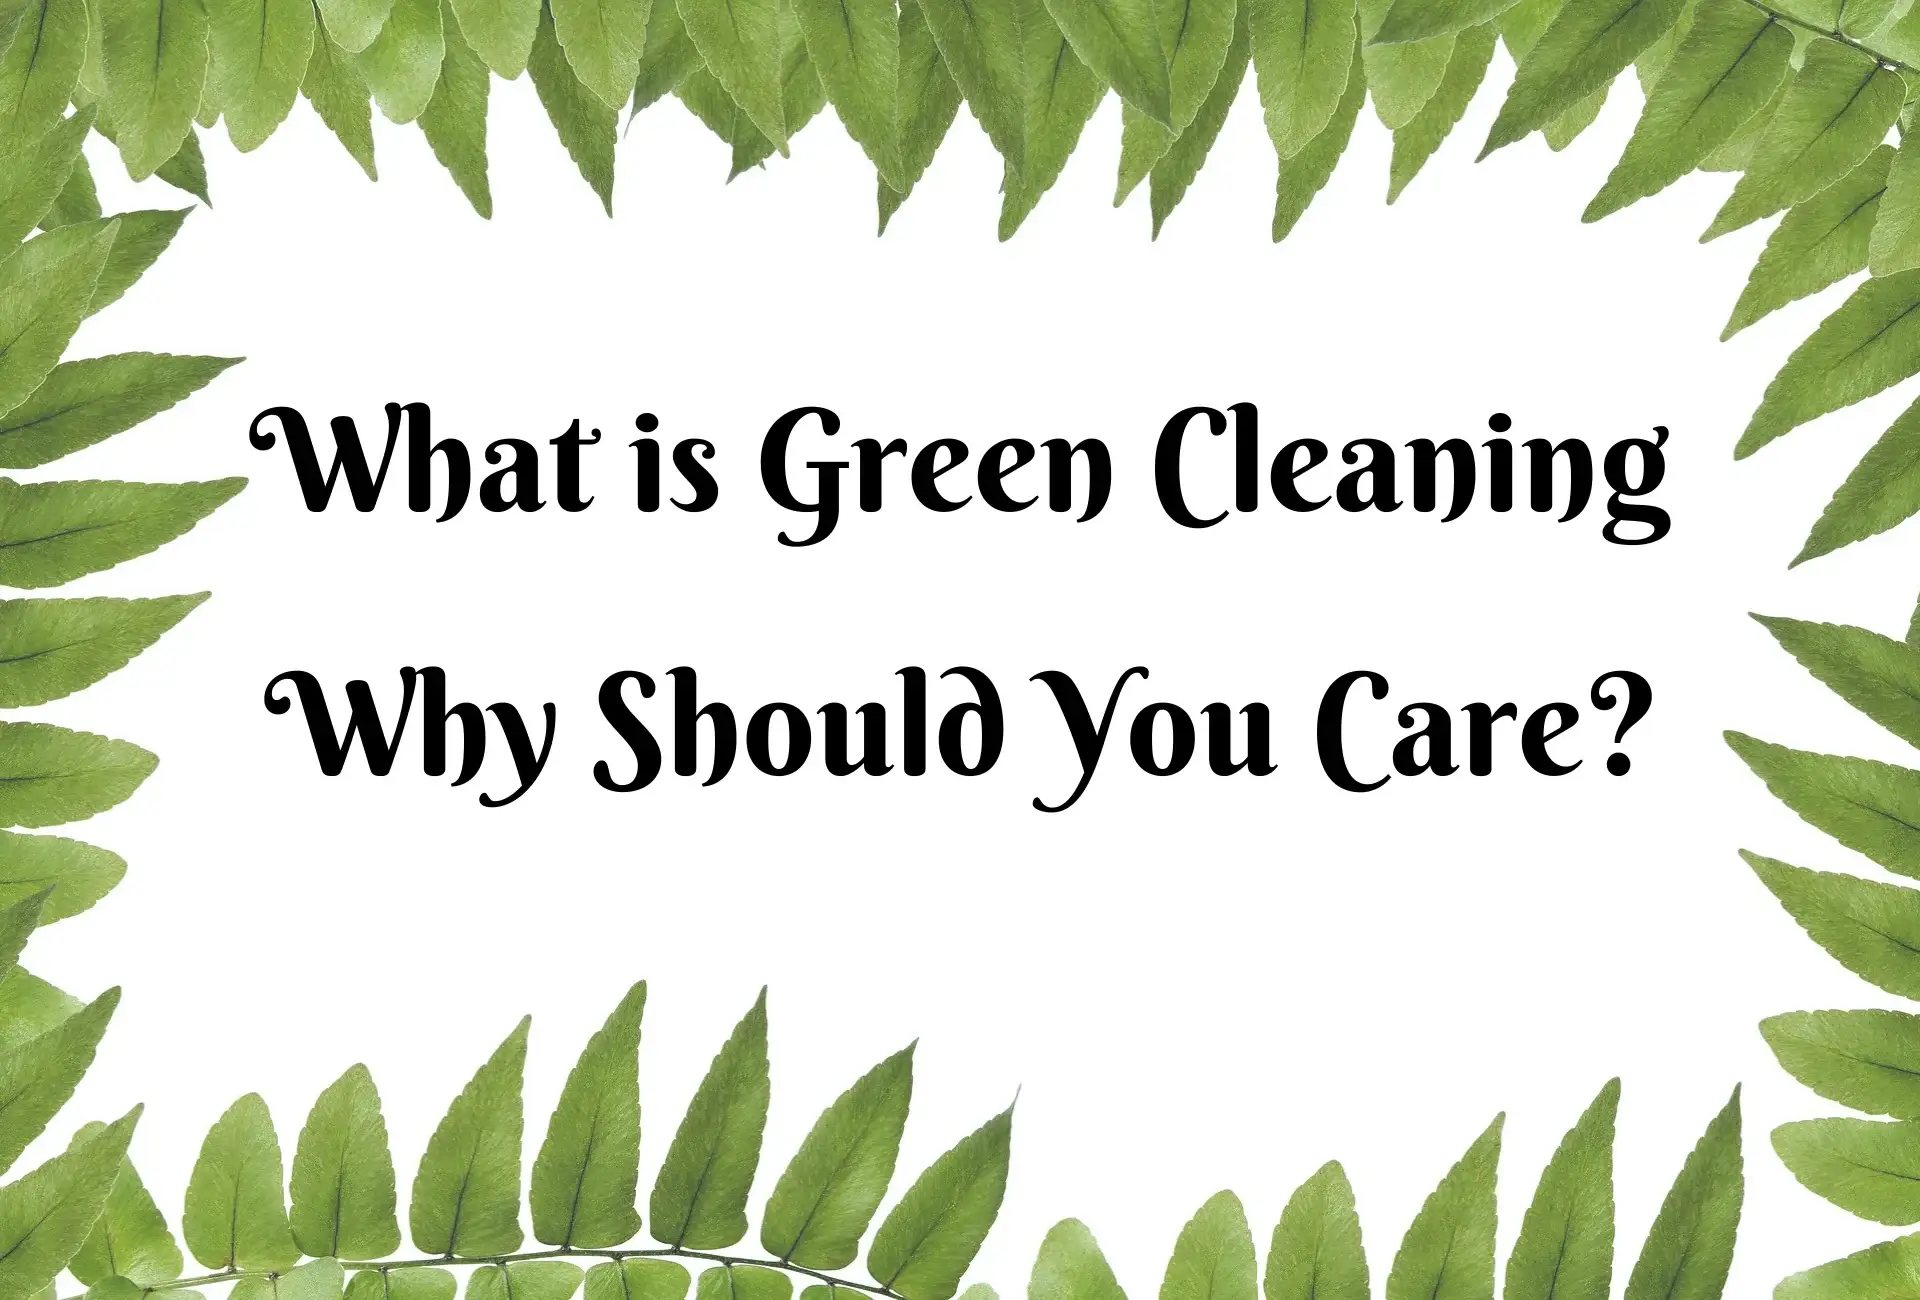 What is Green Cleaning Why Should You Care